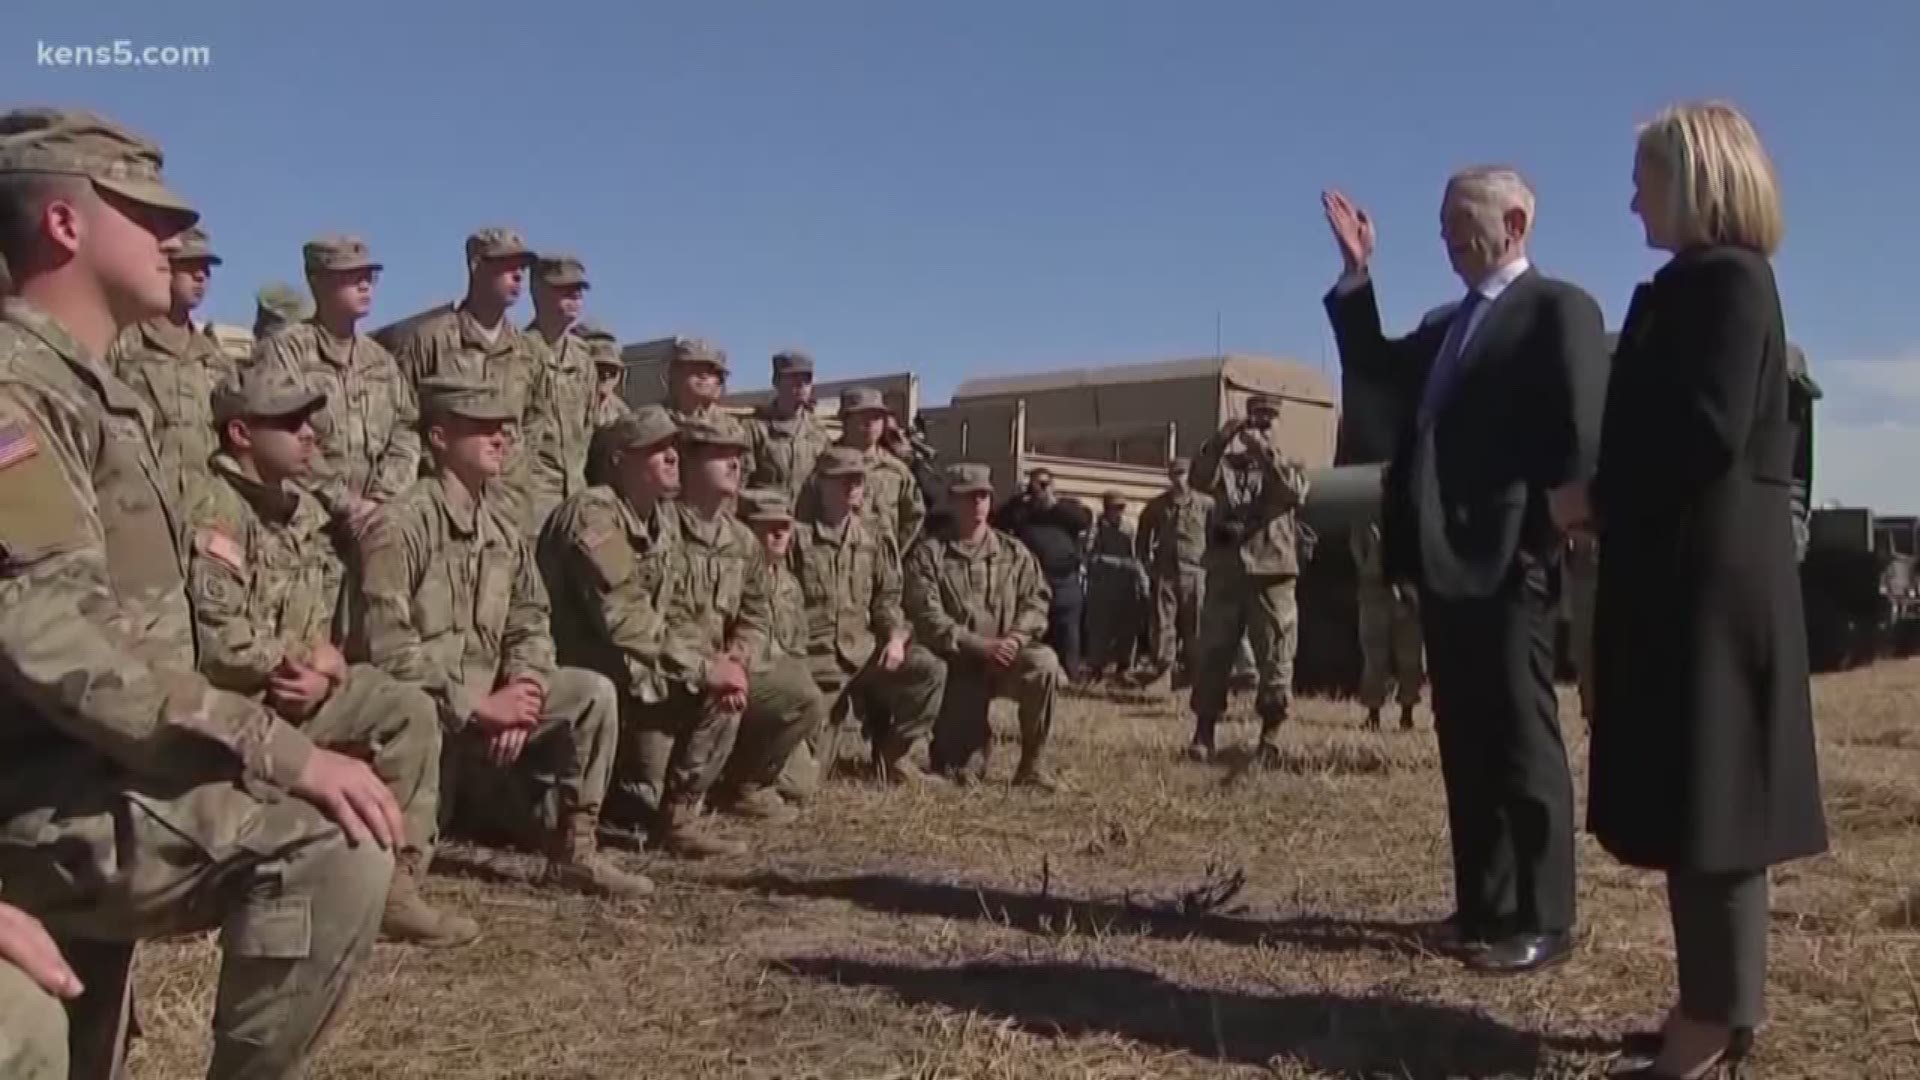 Secretary of Defense James Mattis visited troops in South Texas deployed on a mission to assist customs and border patrol agents preparing for the arrival of the migrant caravan.